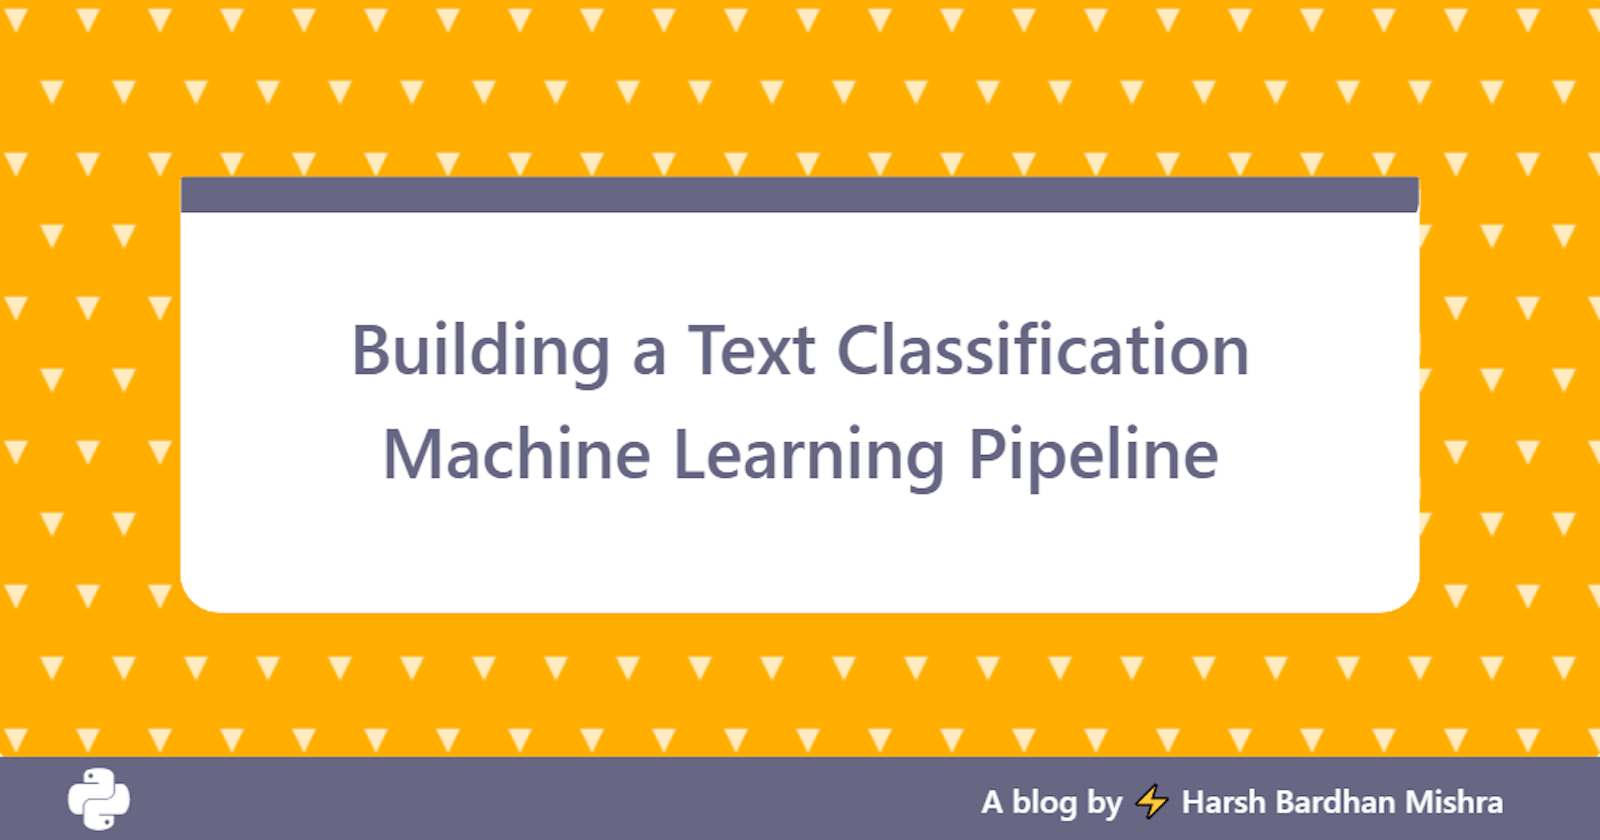 Building a Text Classification Machine Learning Pipeline